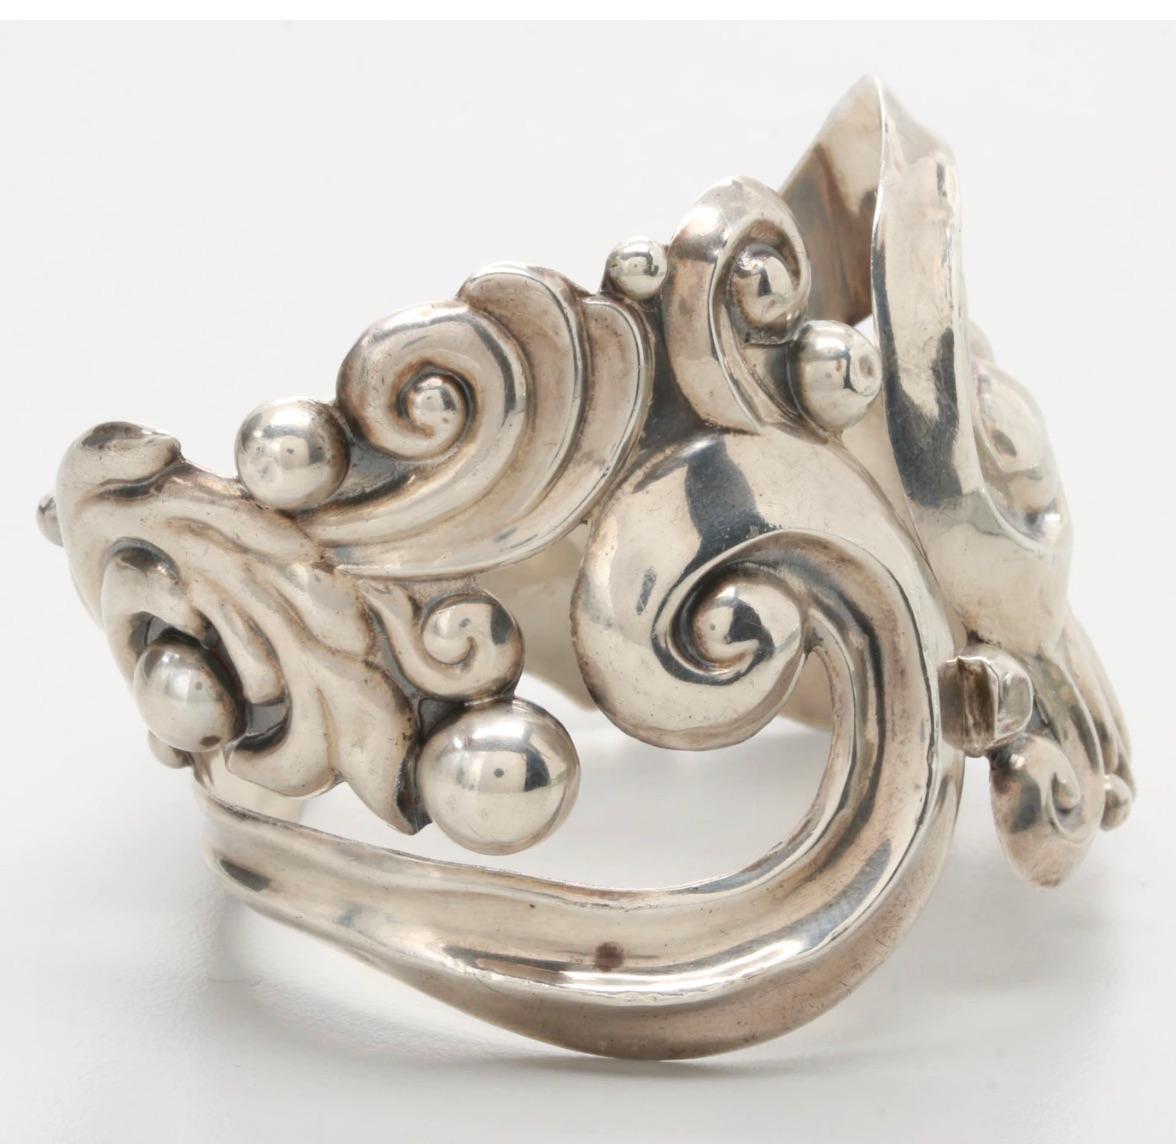 For a Connoisseur of Mexico Jewelry!
A rare 1940s vintage gorgeous Elaborate Design sterling silver 
Mexico Clamper bracelet by a master artisan, Antonio Pineda
Clamper bracelet featuring flowing Repousse lines with ball accents swirling around the